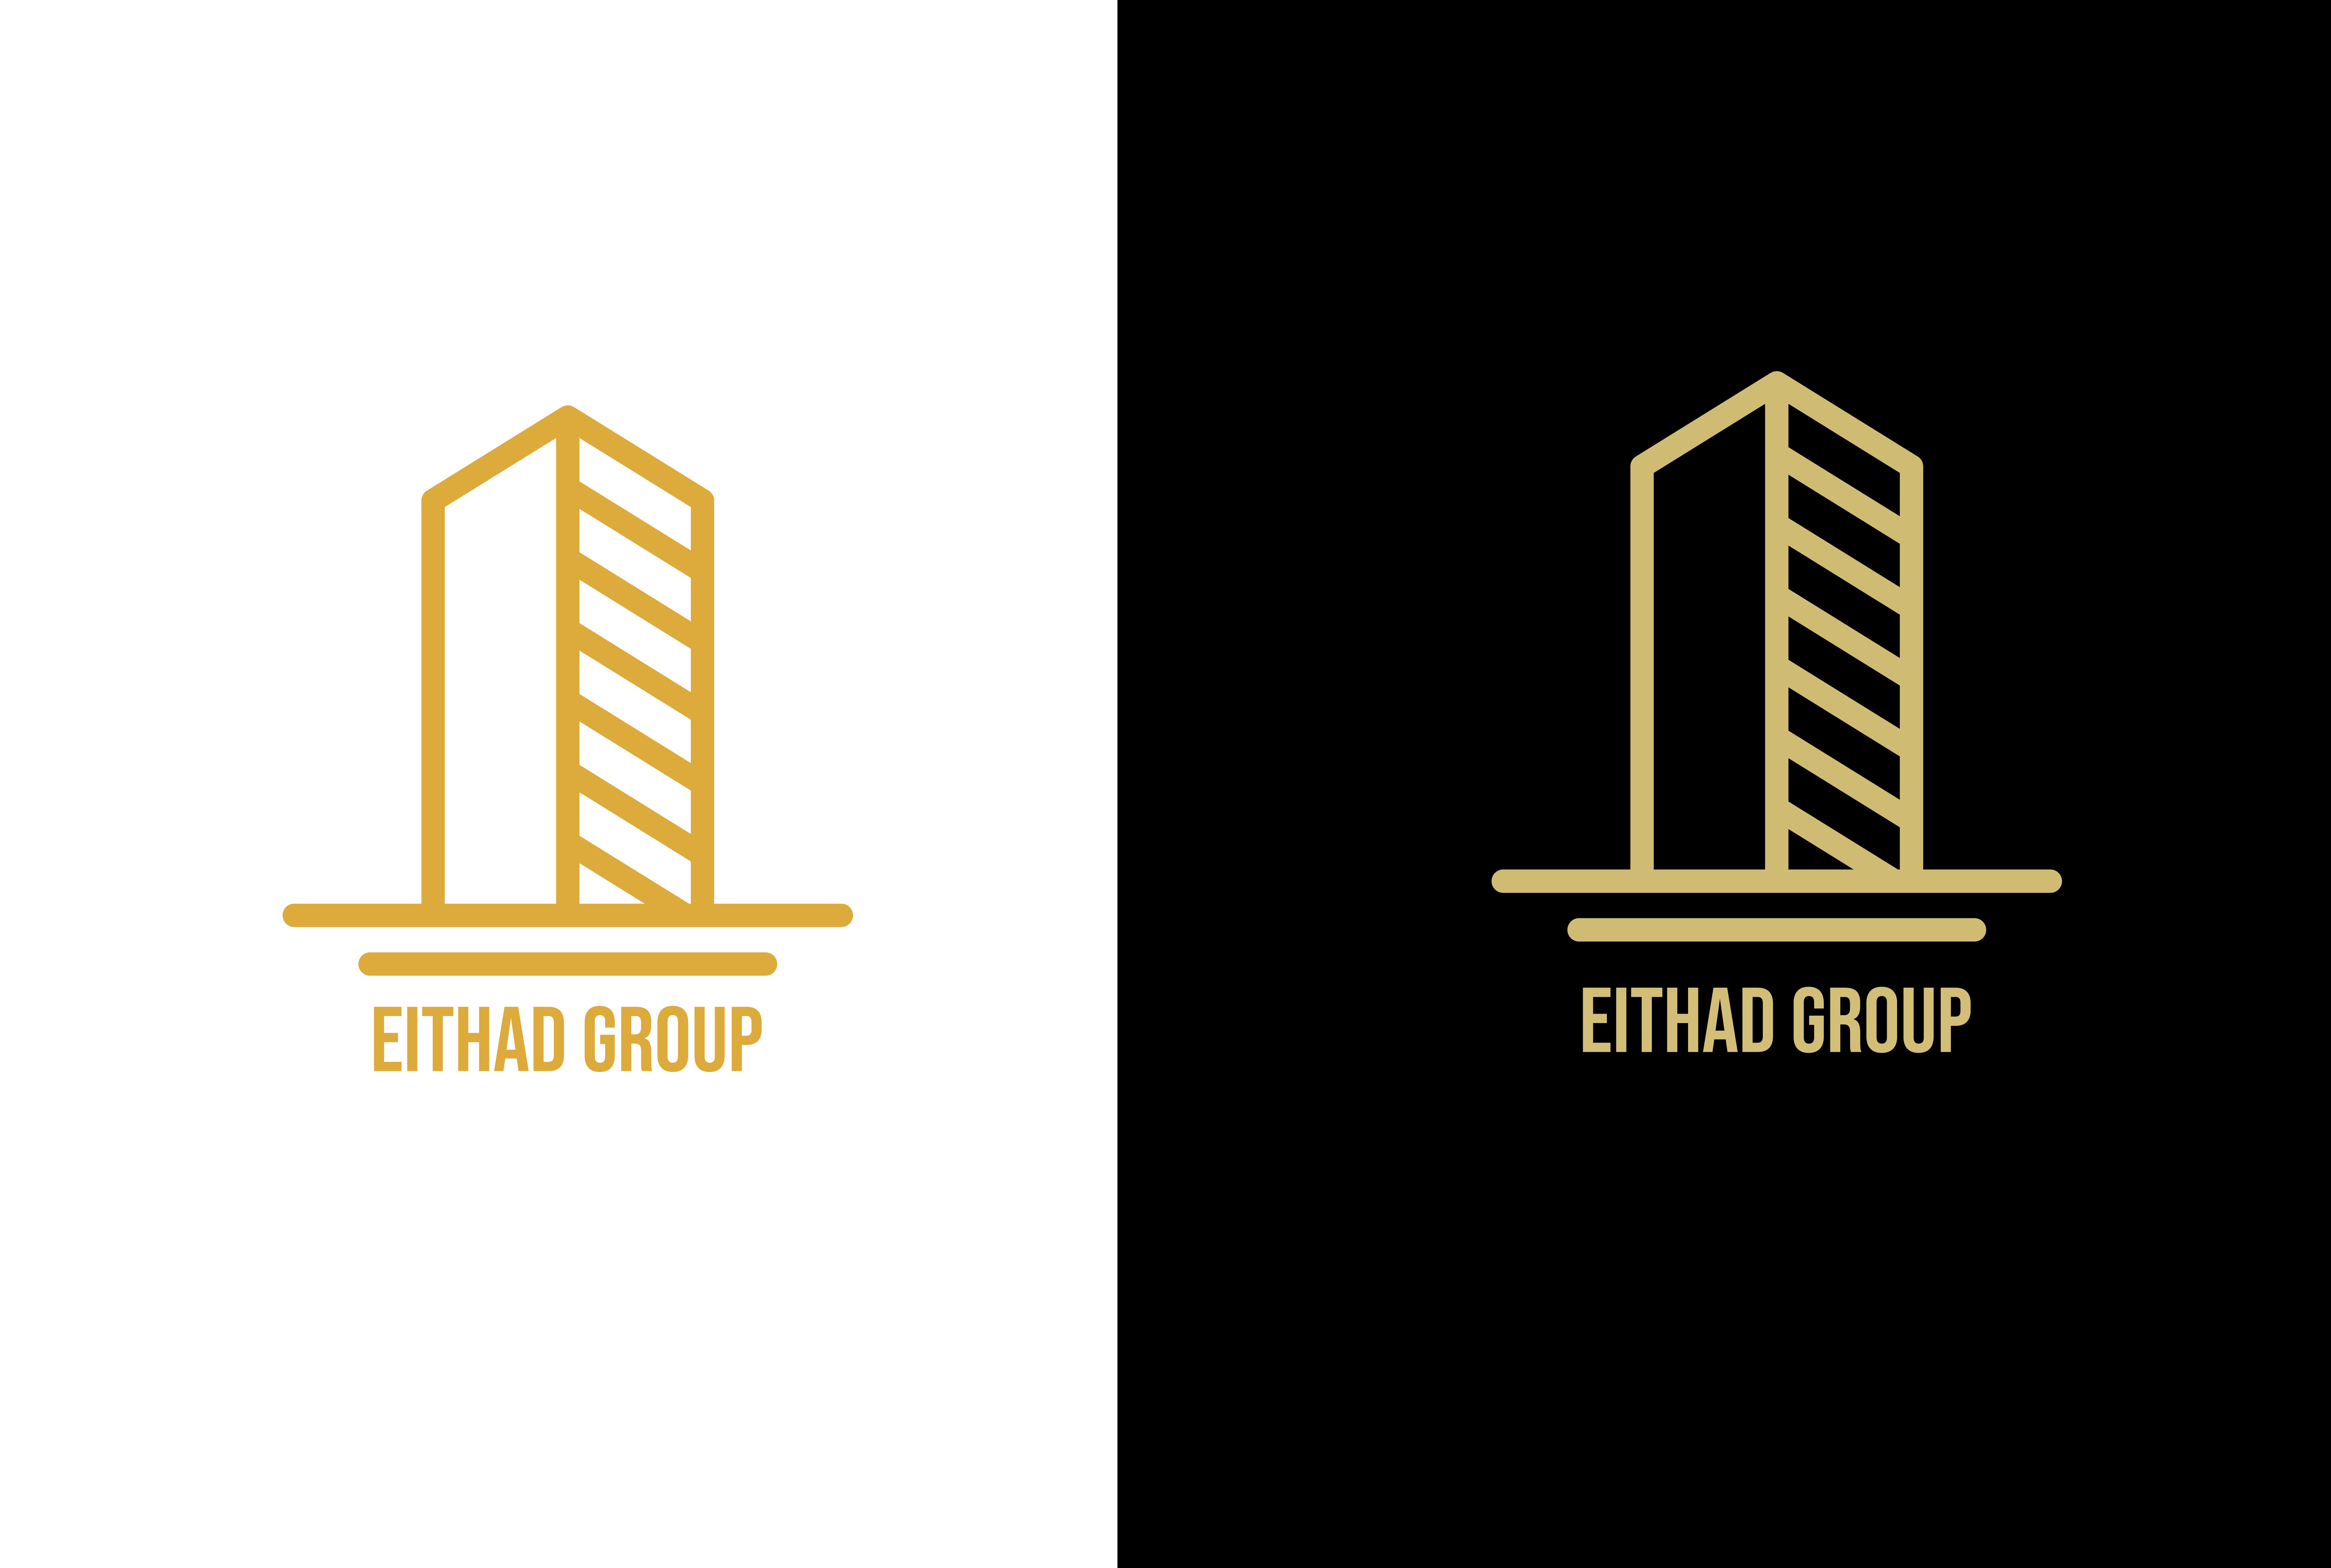 I Will Design Flatminimalist Logo For Your Business Or Company For 10